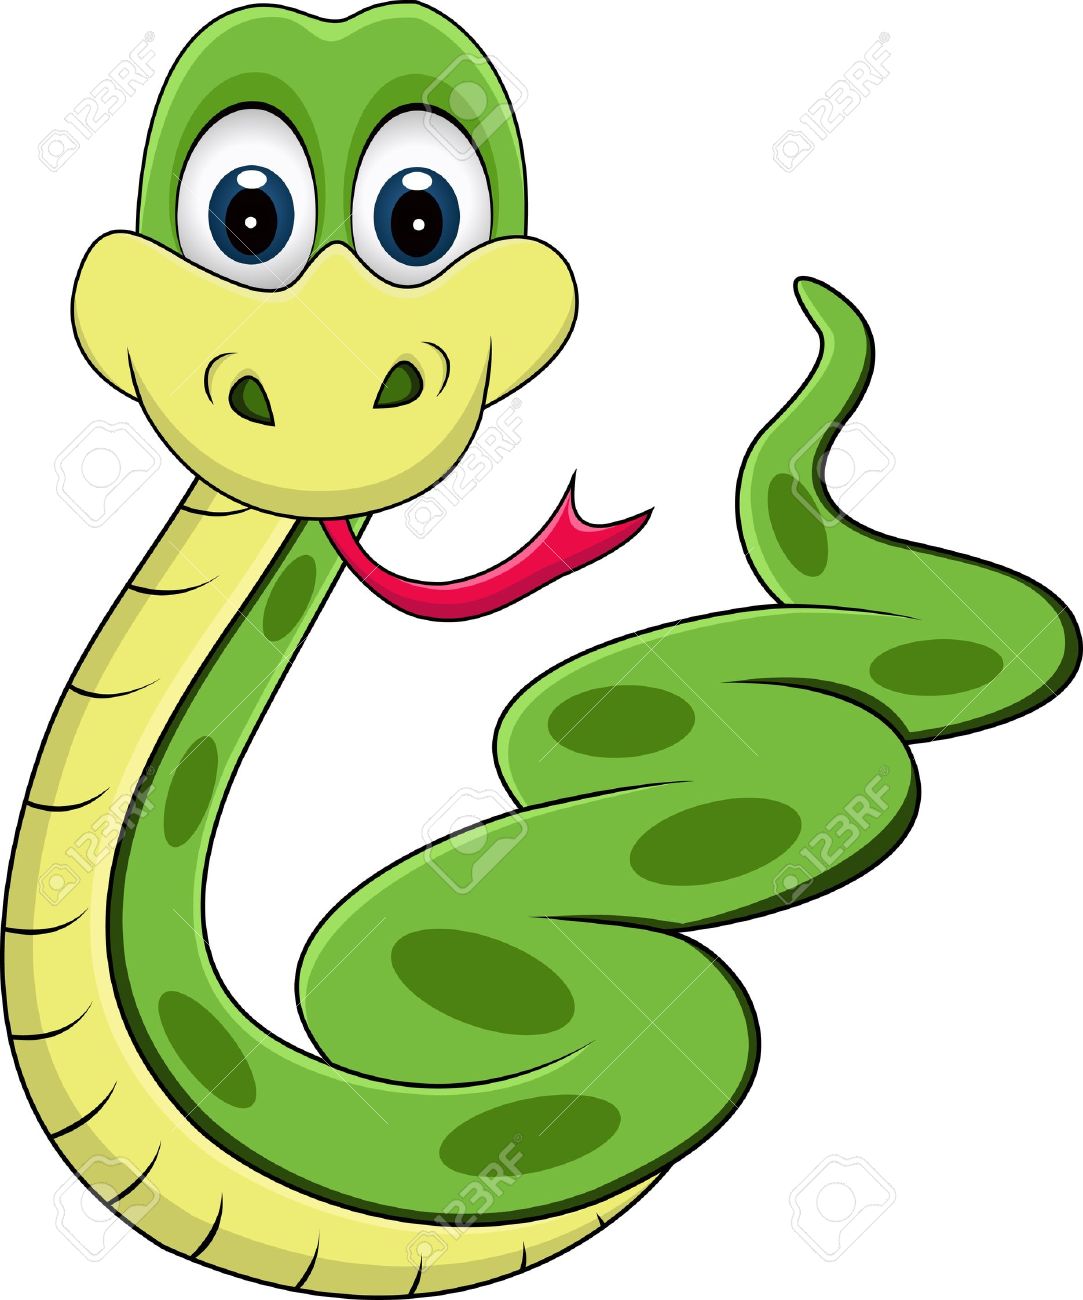 Serpent clipart #7, Download drawings